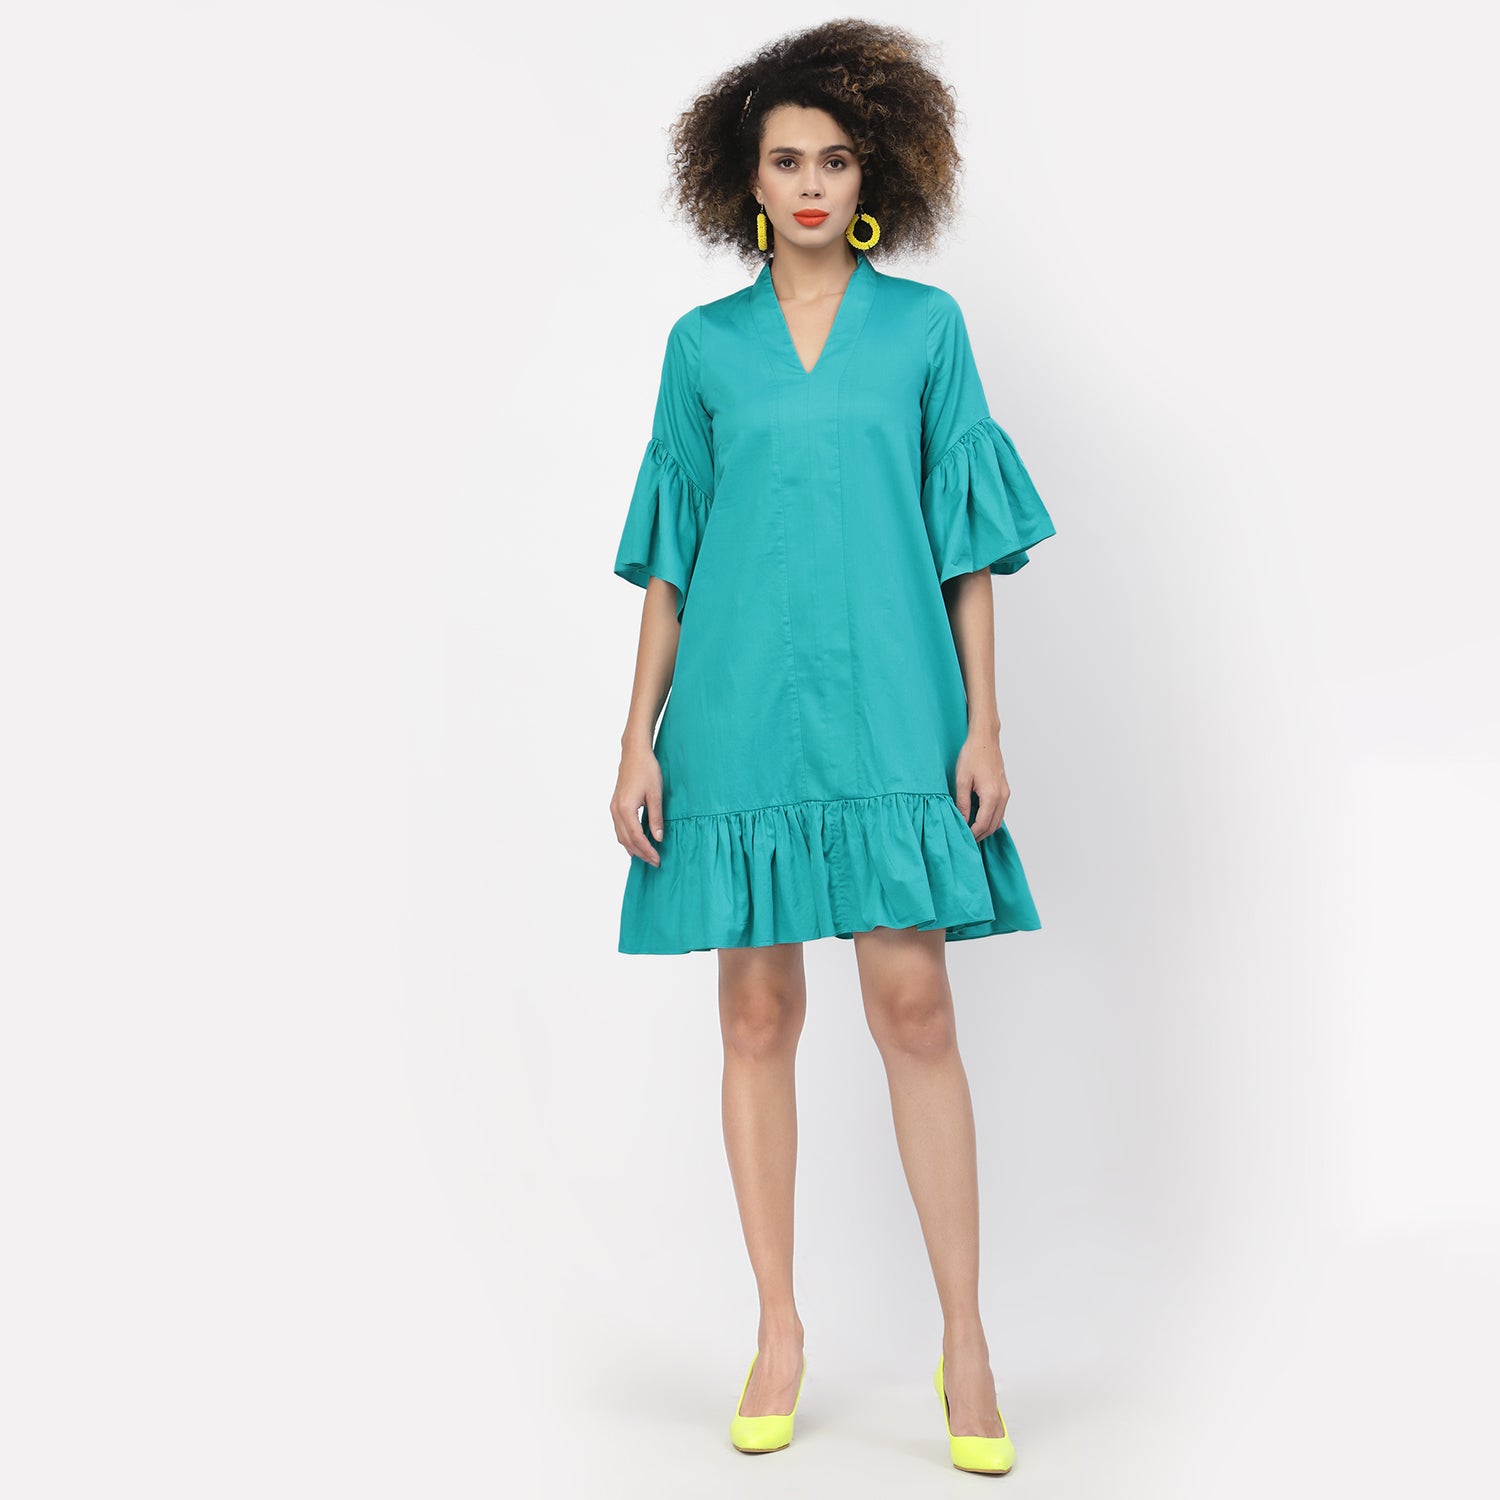 Turquoise Cotton A-line Dress With Frill